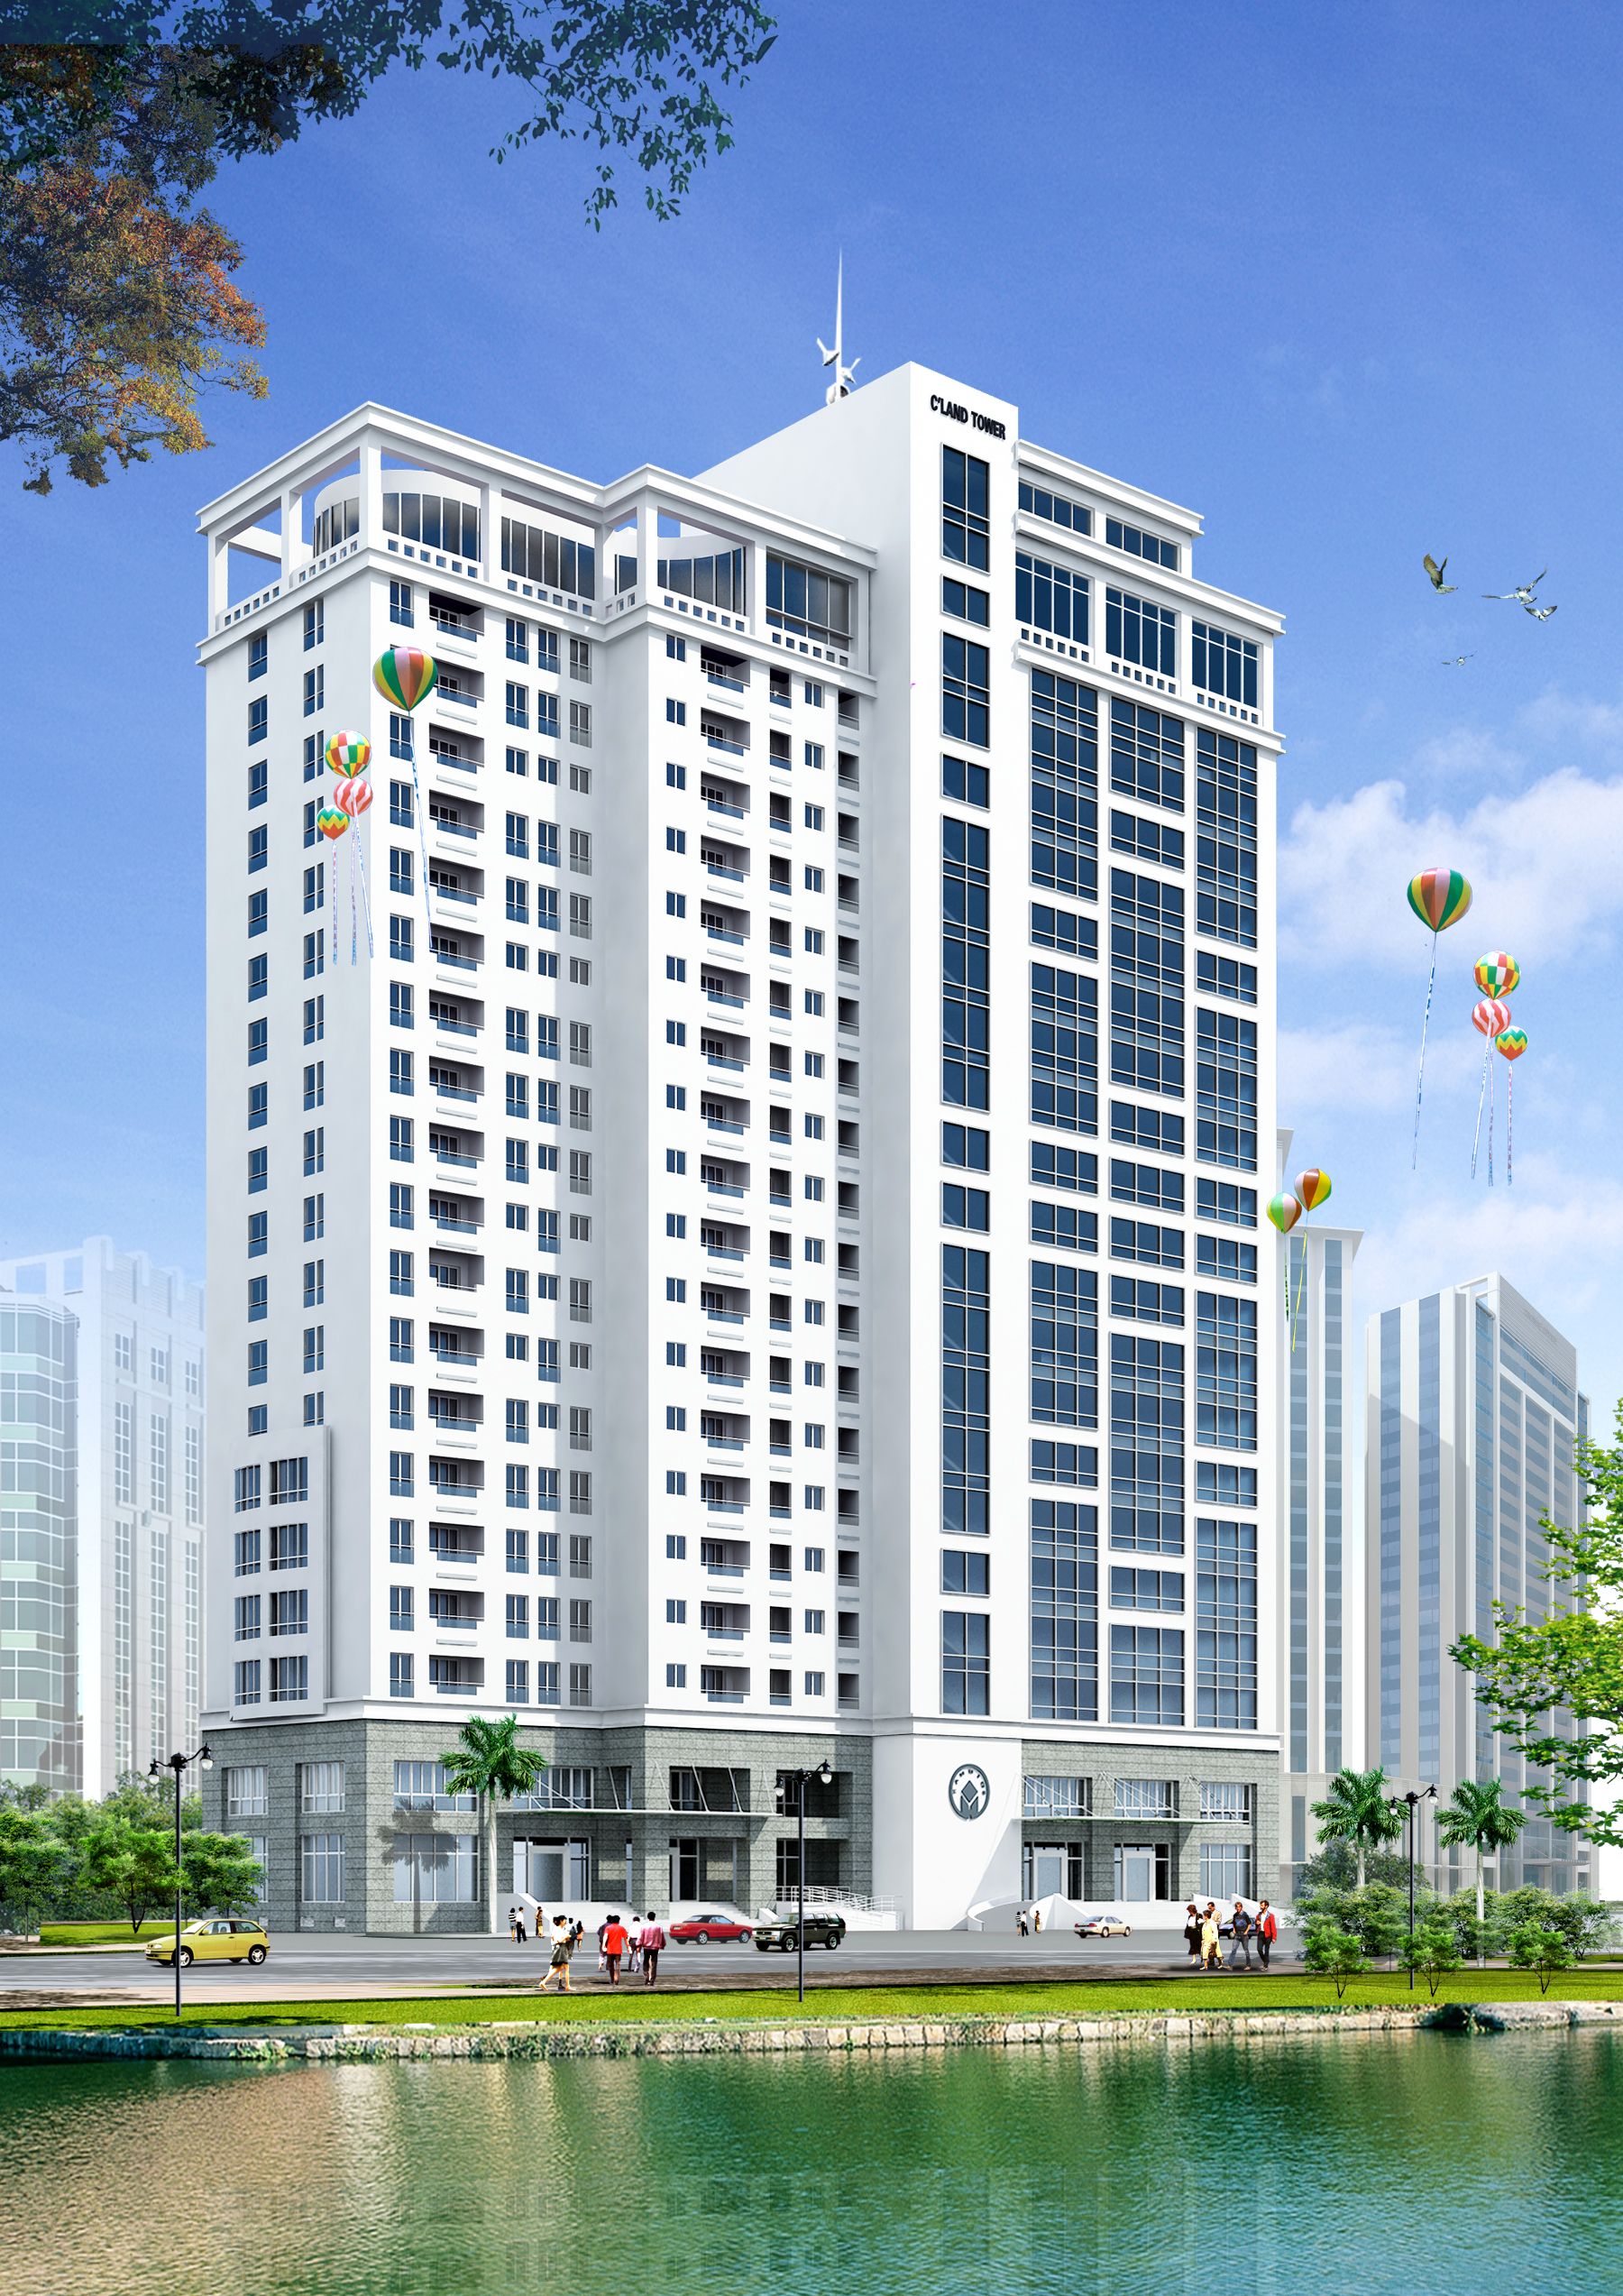 Project of combination of Office and high-rise building, C'land Tower